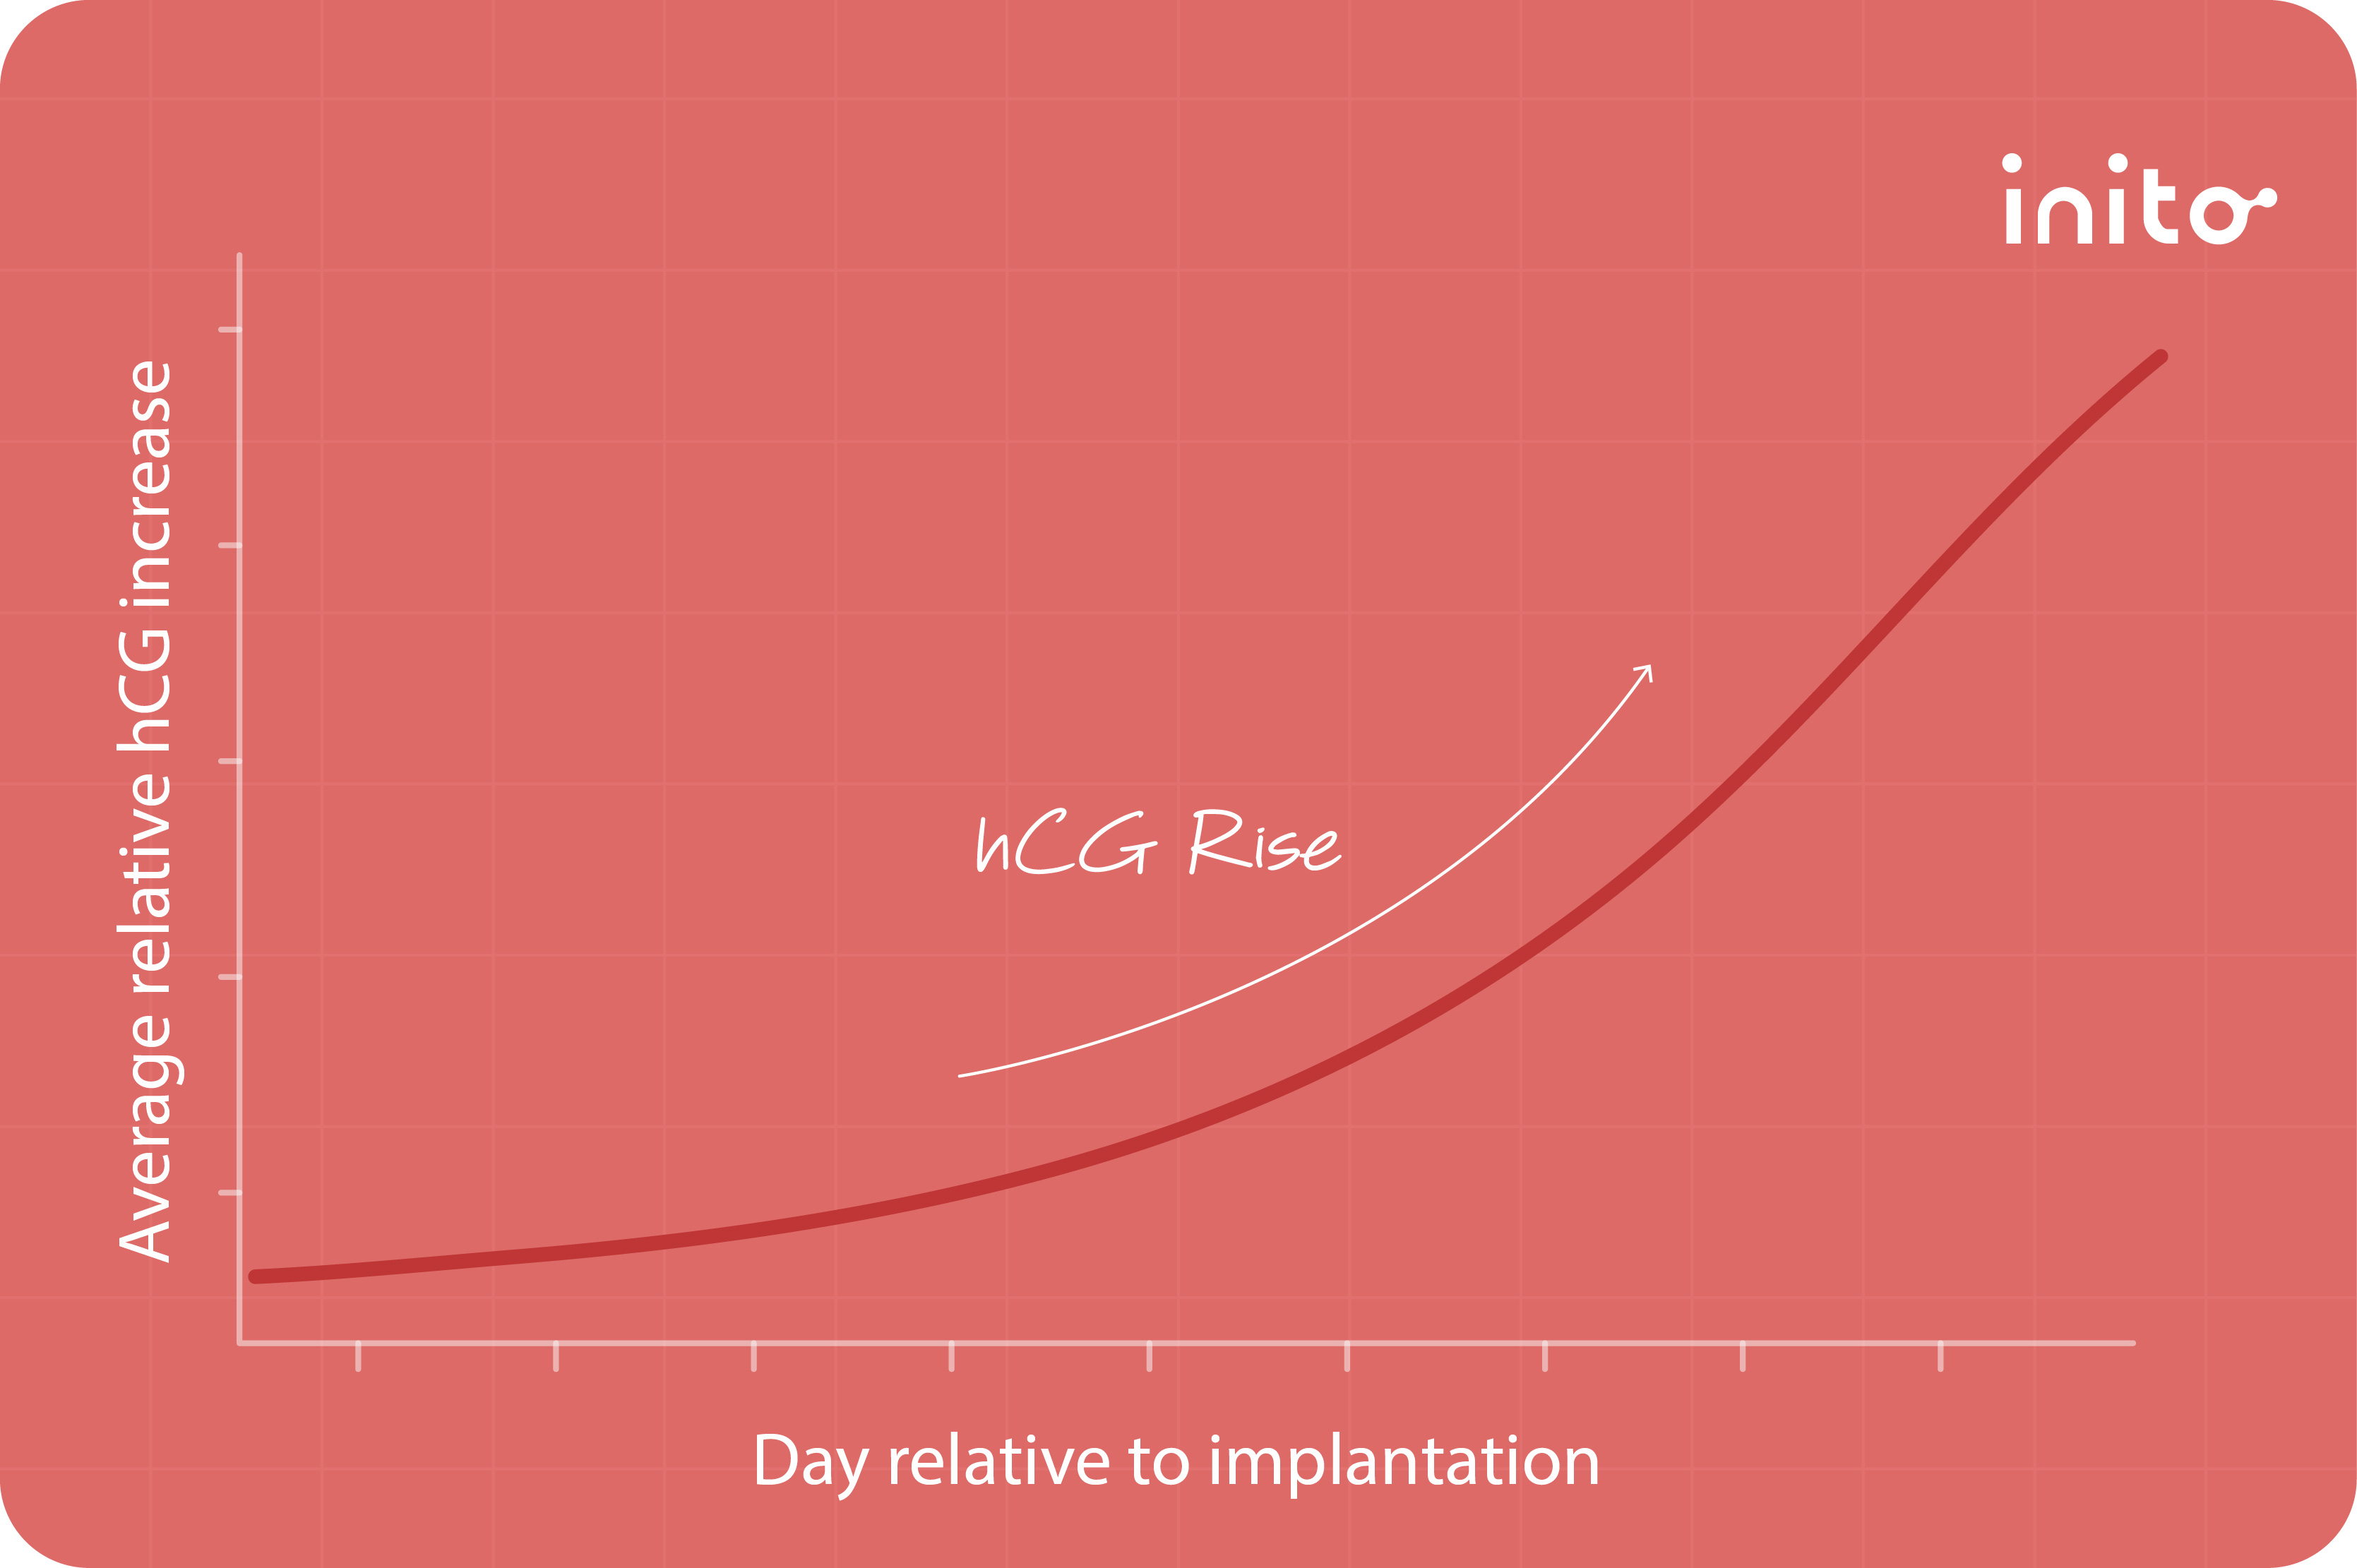 How Long After Implantation Does hCG Rise?